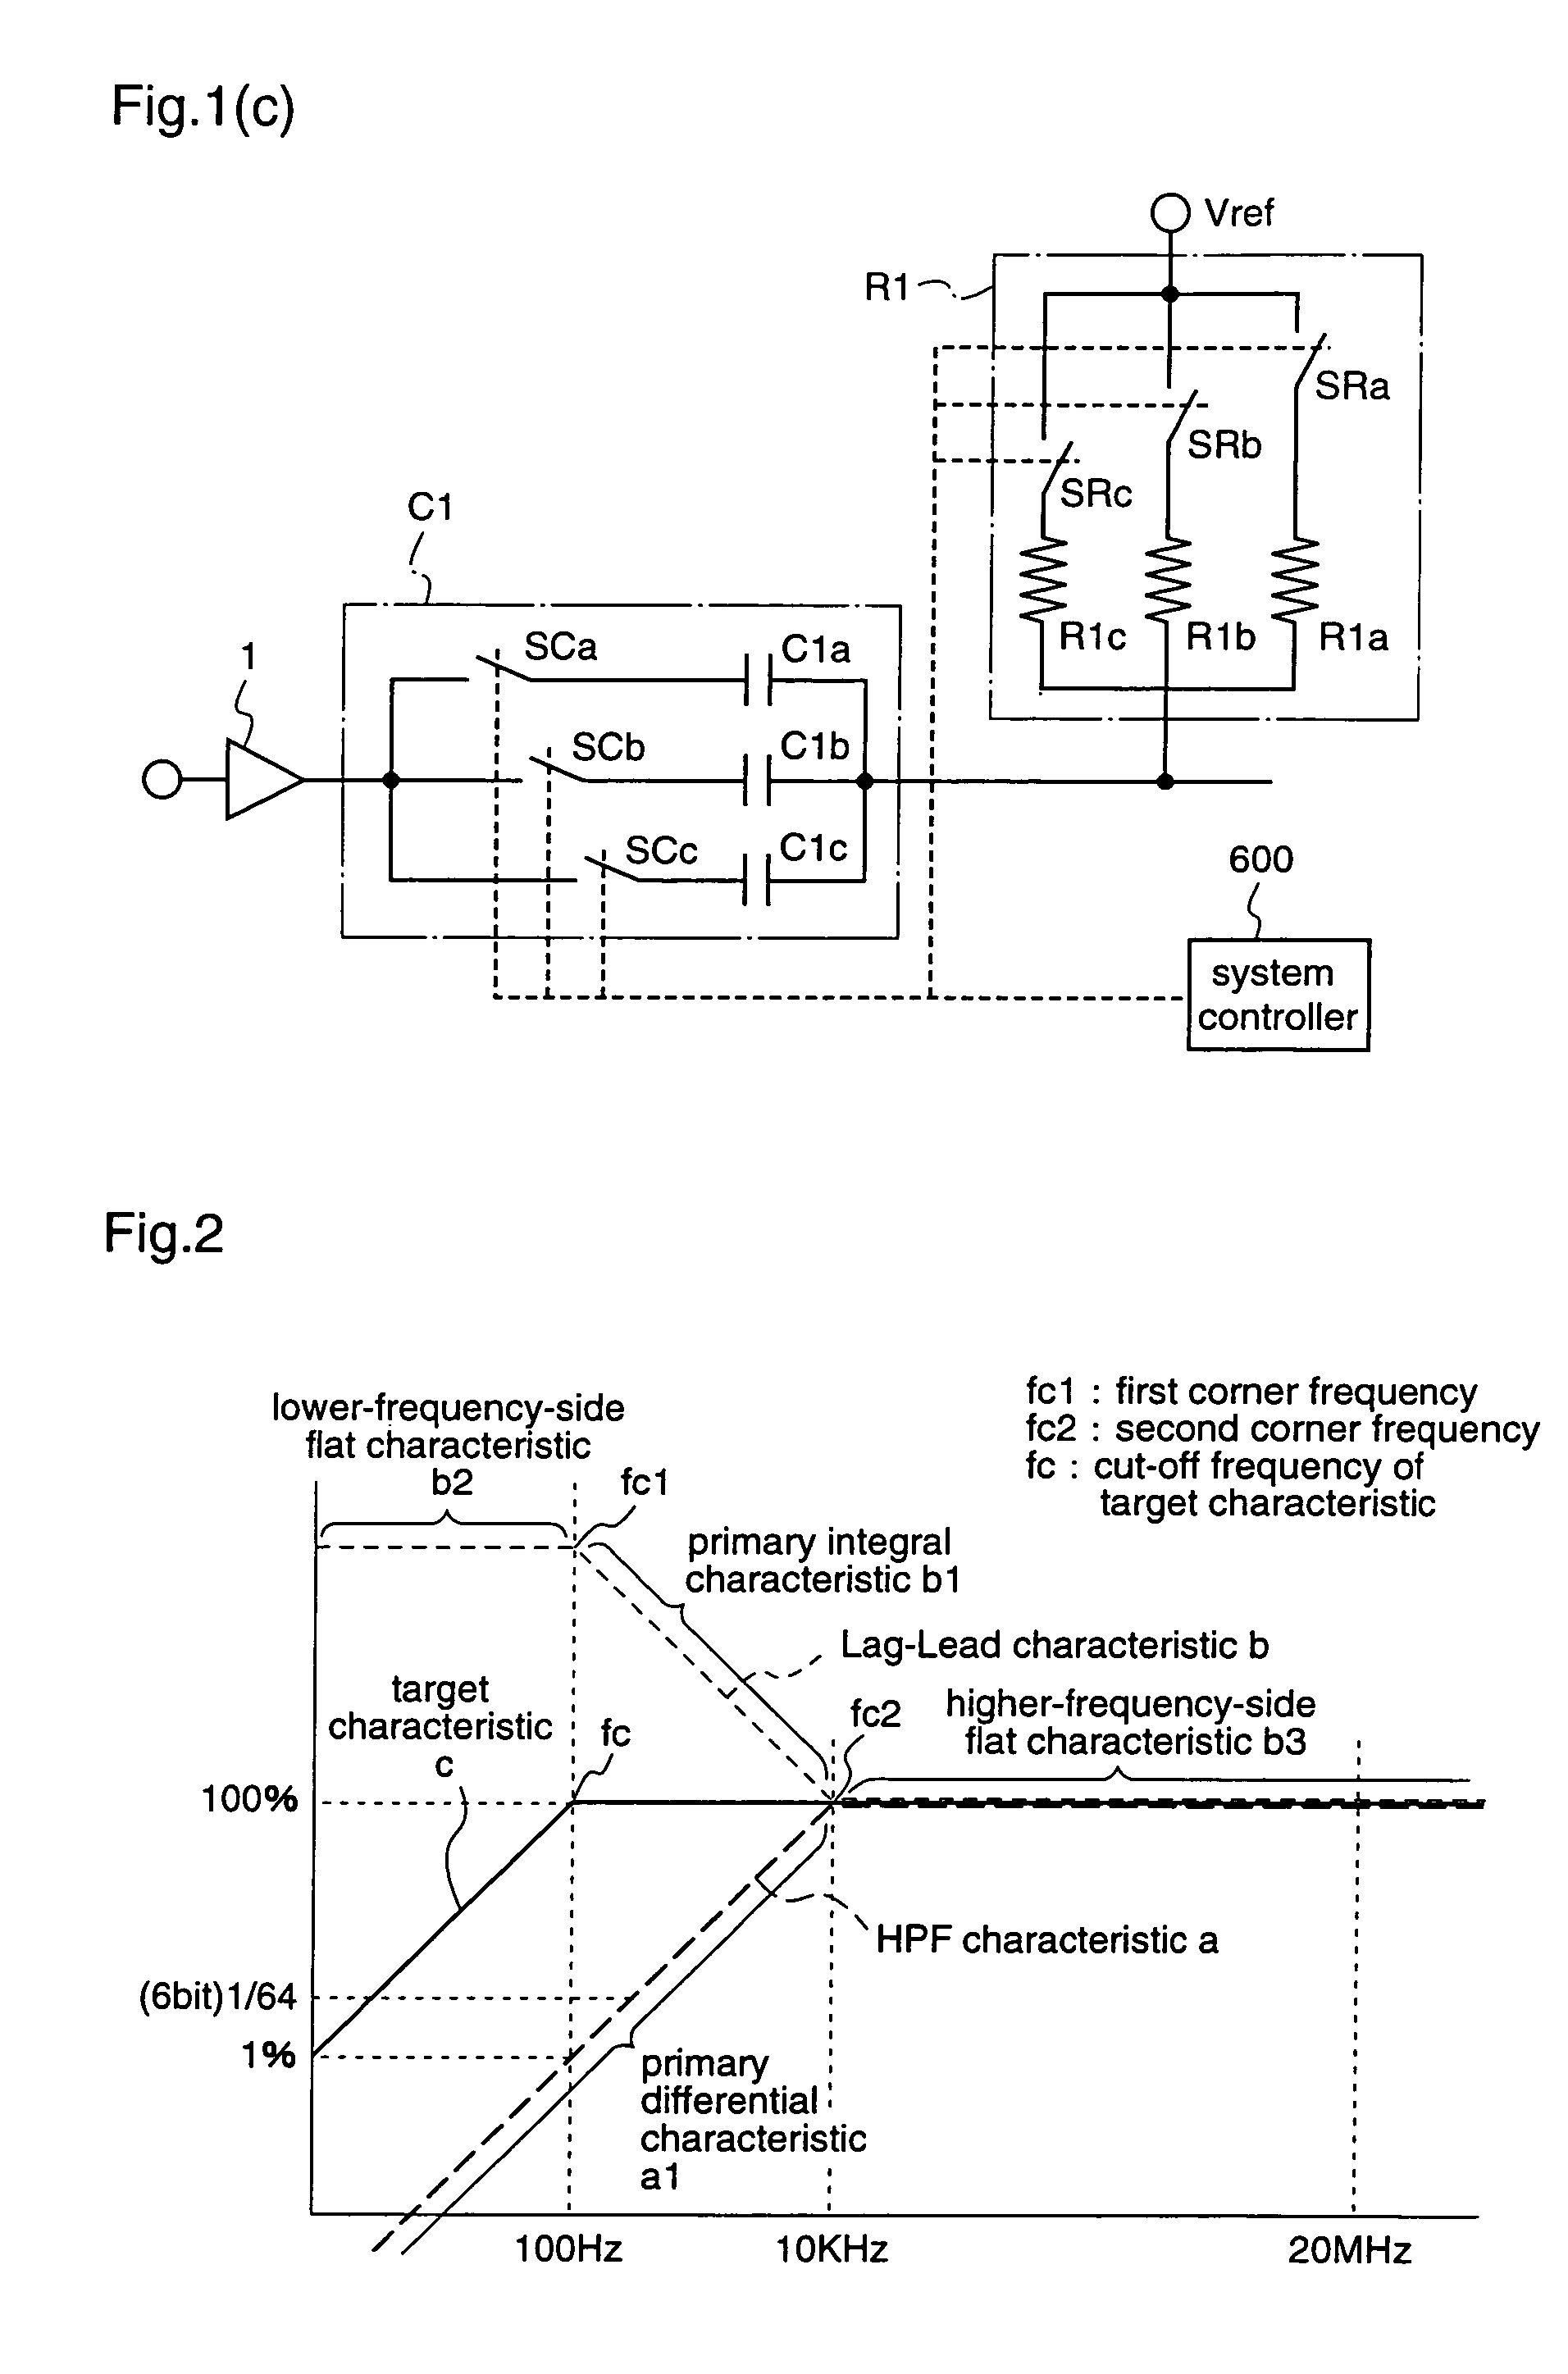 Information playback apparatus, in-line circuit, and method for implementing in-line circuit on information playback apparatus